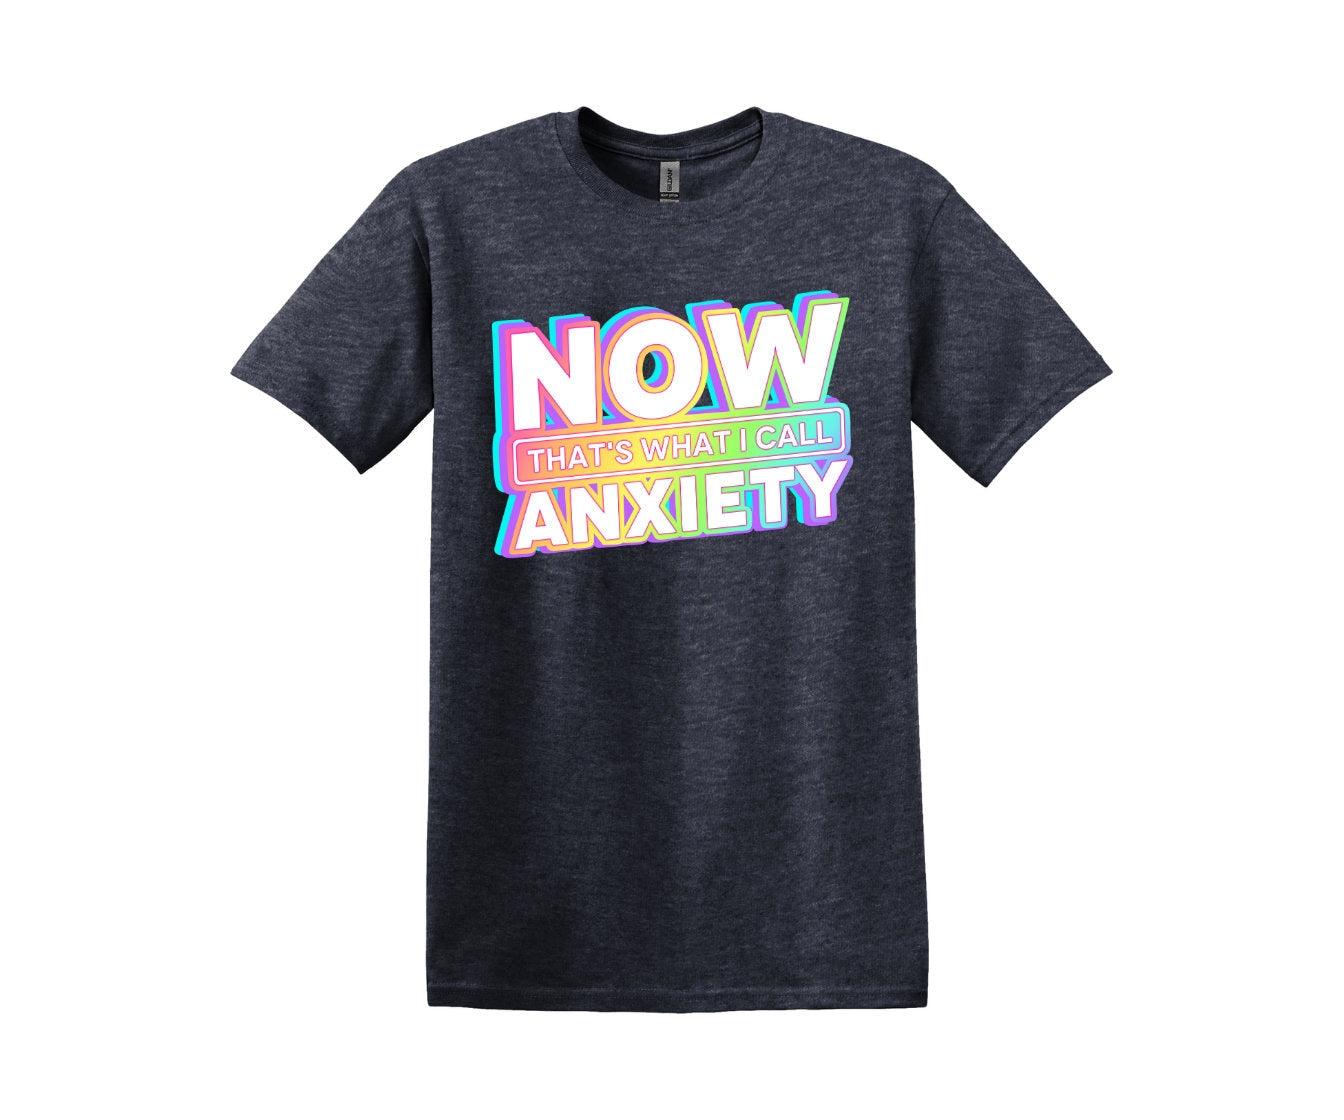 Now That's What I Call Anxiety, Funny Anxiety T-Shirt, Adult Tee